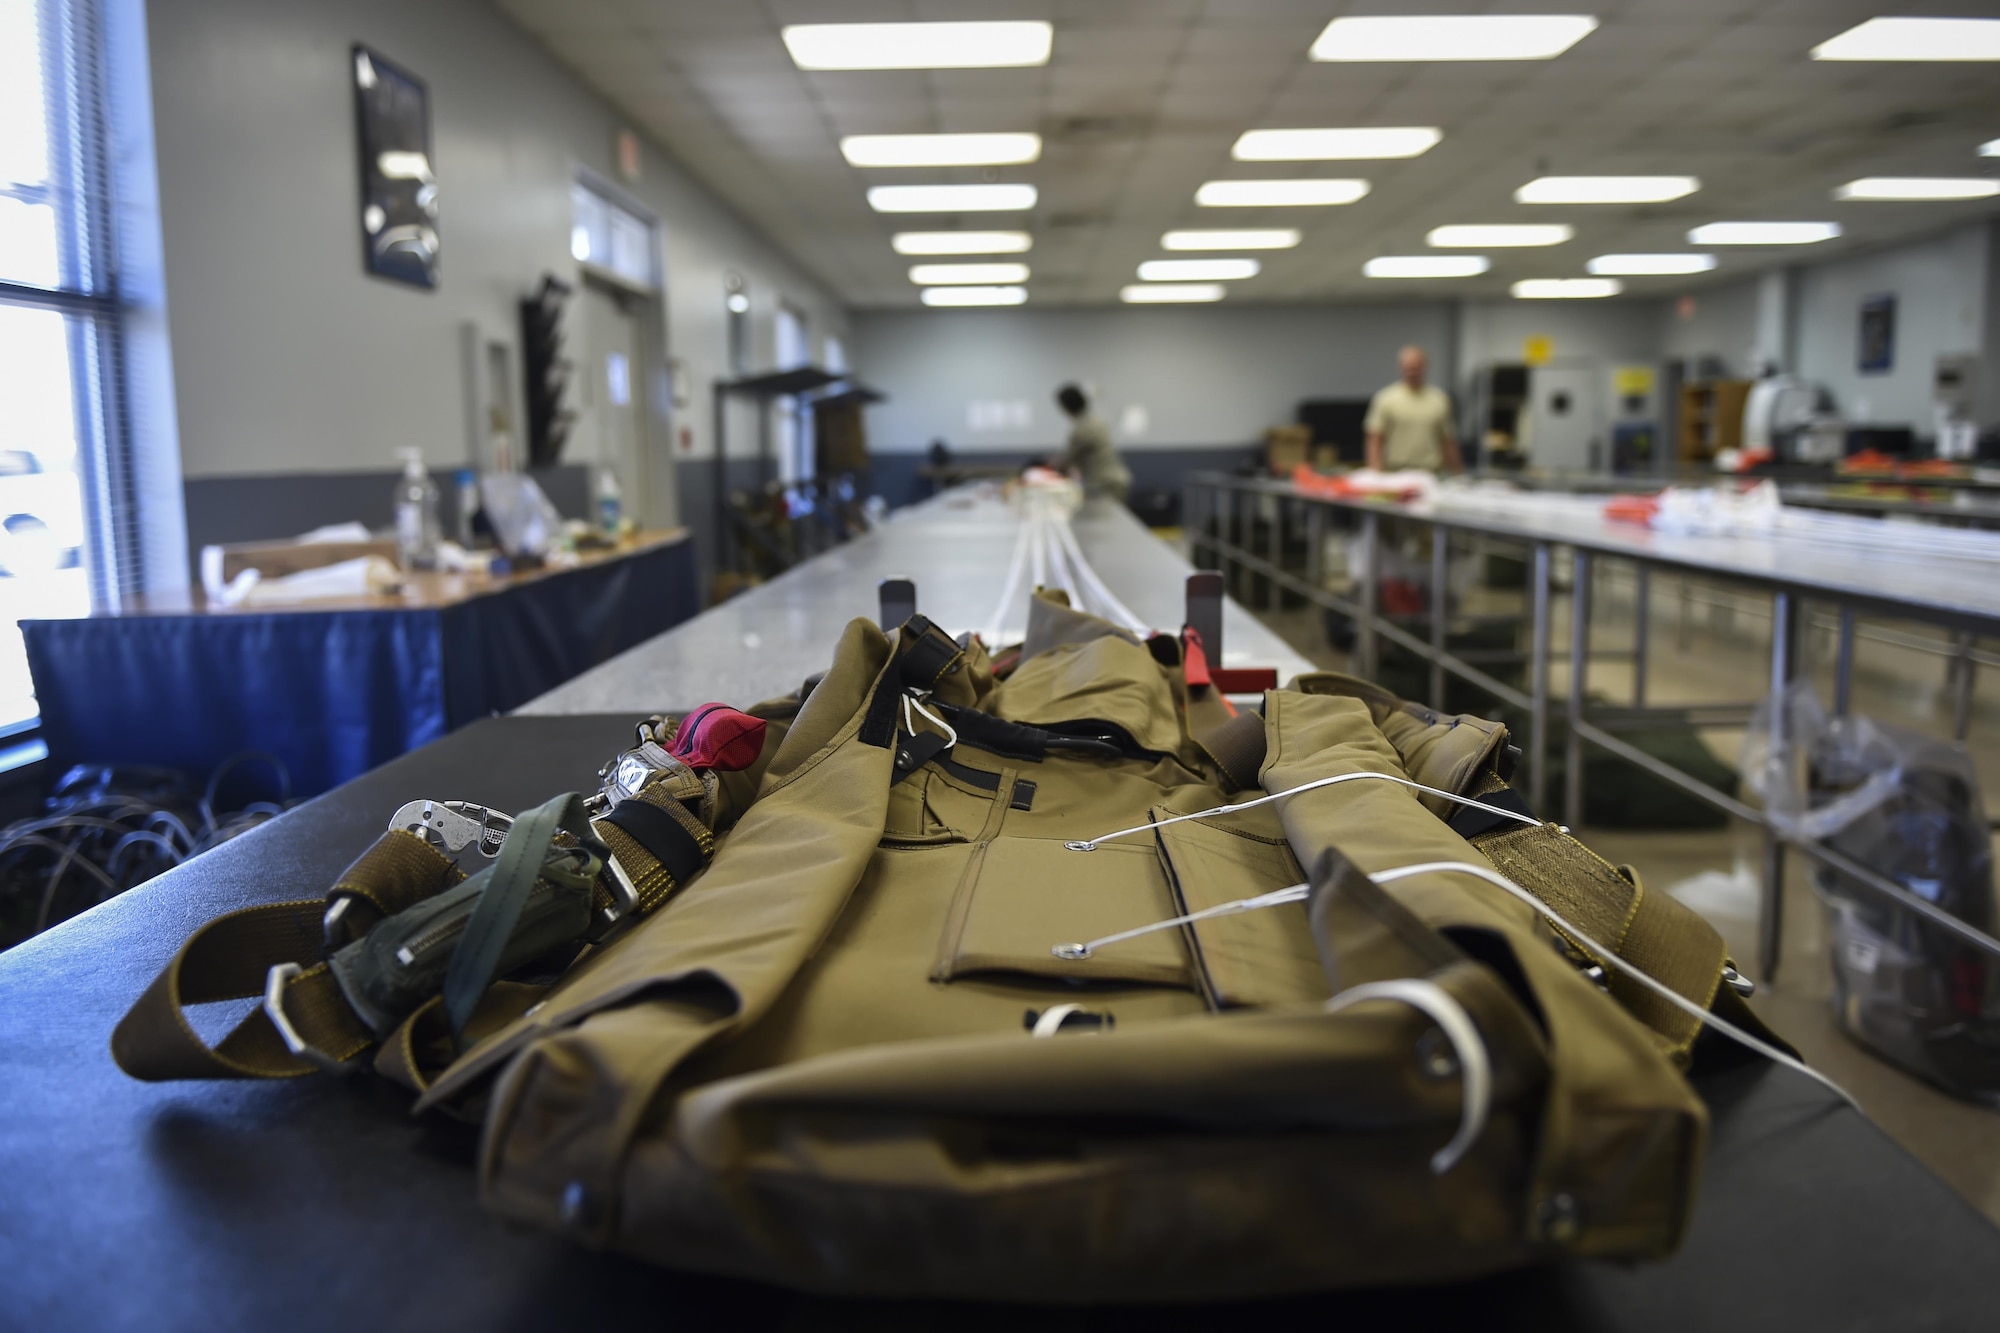 The low-profile parachute is configured for use in AC-130 gunships, replacing the BA-22 parachute. The LPP weighs approximately 20 pounds, roughly half of the BA-22. (U.S. Air Force photo by Airman 1st Class Joseph Pick)